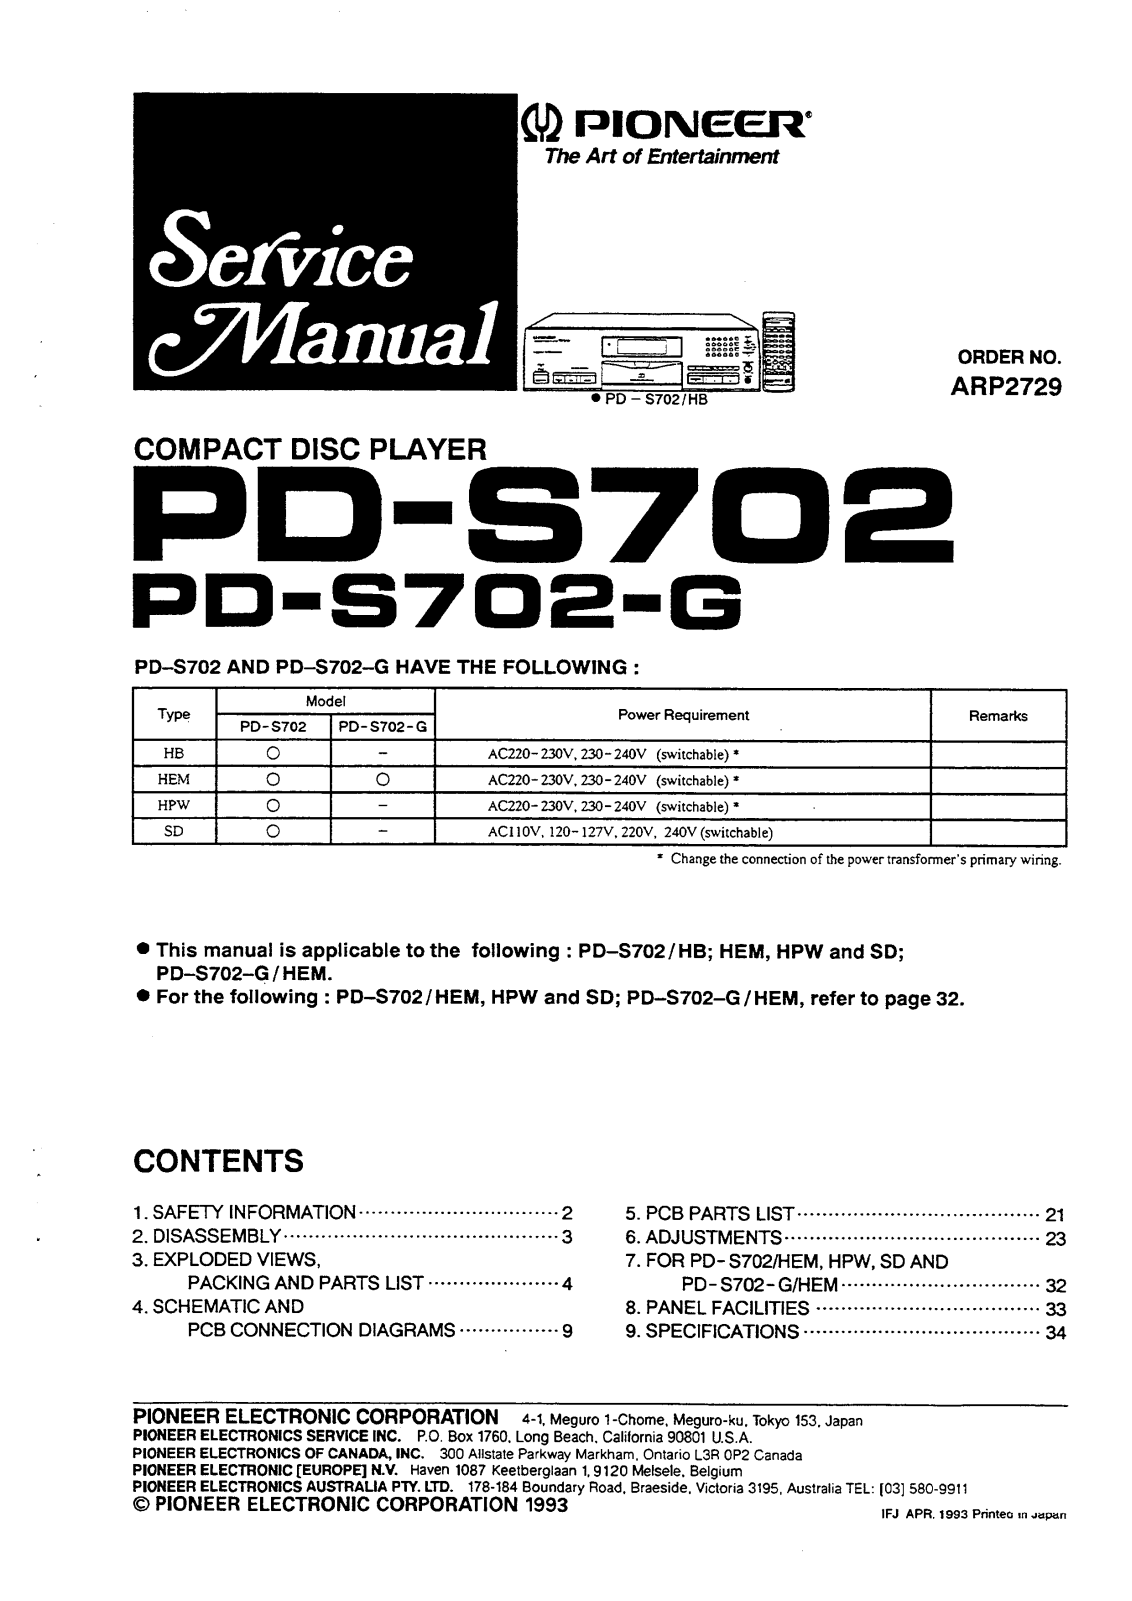 Pioneer PDS-702, PDS-702-G Service manual